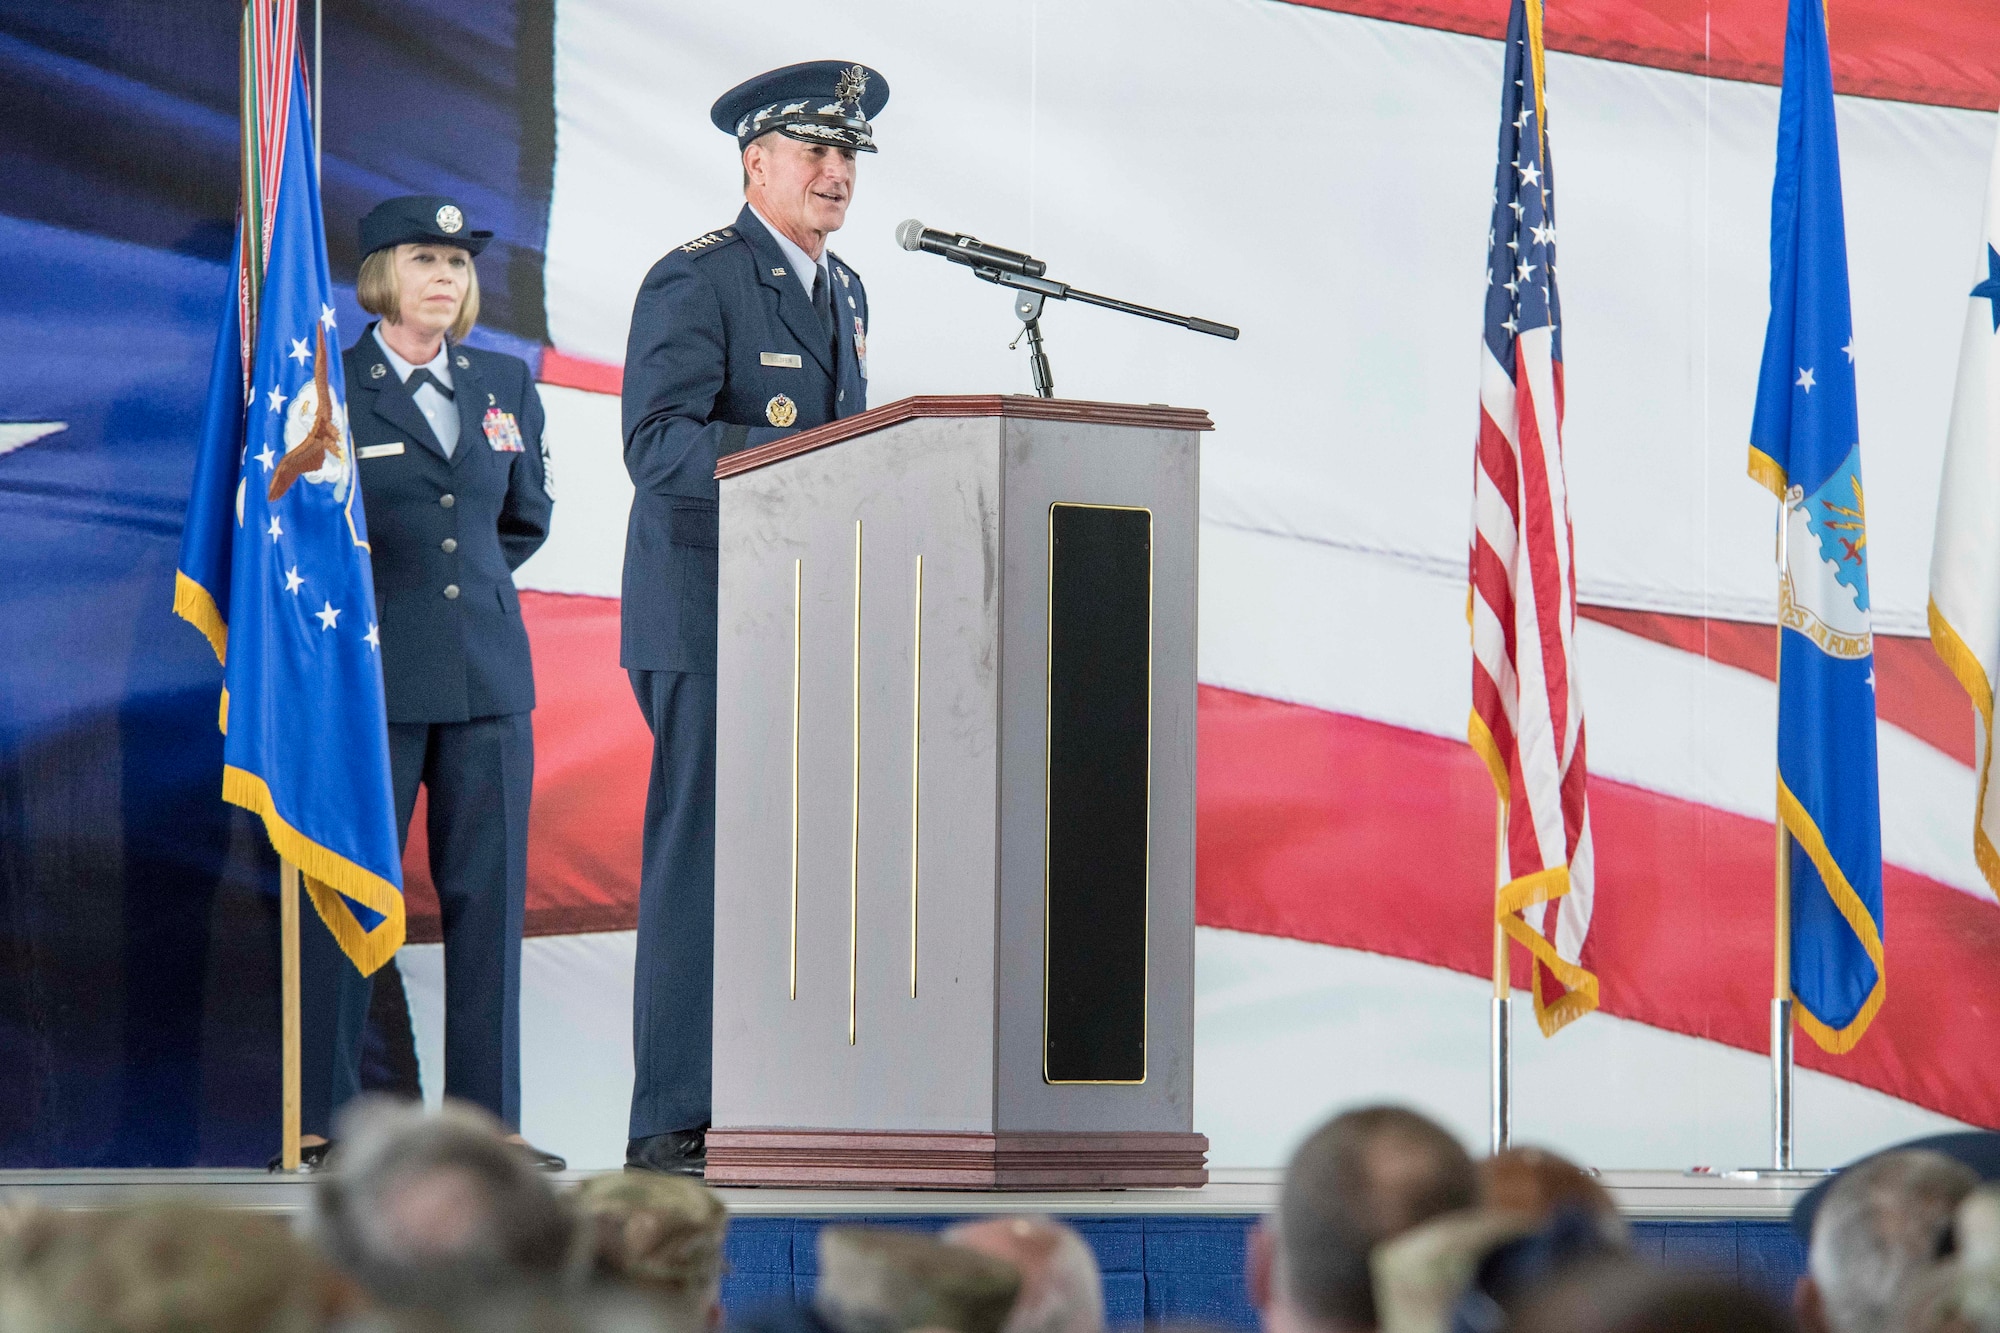 U.S. Air Force Chief of Staff Gen. David L. Goldfein, speaks during Air Education and Training Command’s change of command ceremony at Joint Base San Antonio-Randolph, Texas, July 26, 2019. Goldfein presided over the ceremony, at which time U.S. Air Force Lt. Gen. Steve Kwast relinquished command to U.S. Air Force Lt. Gen. Brad Webb. (U.S. Air Force photo by Sean M. Worrell)